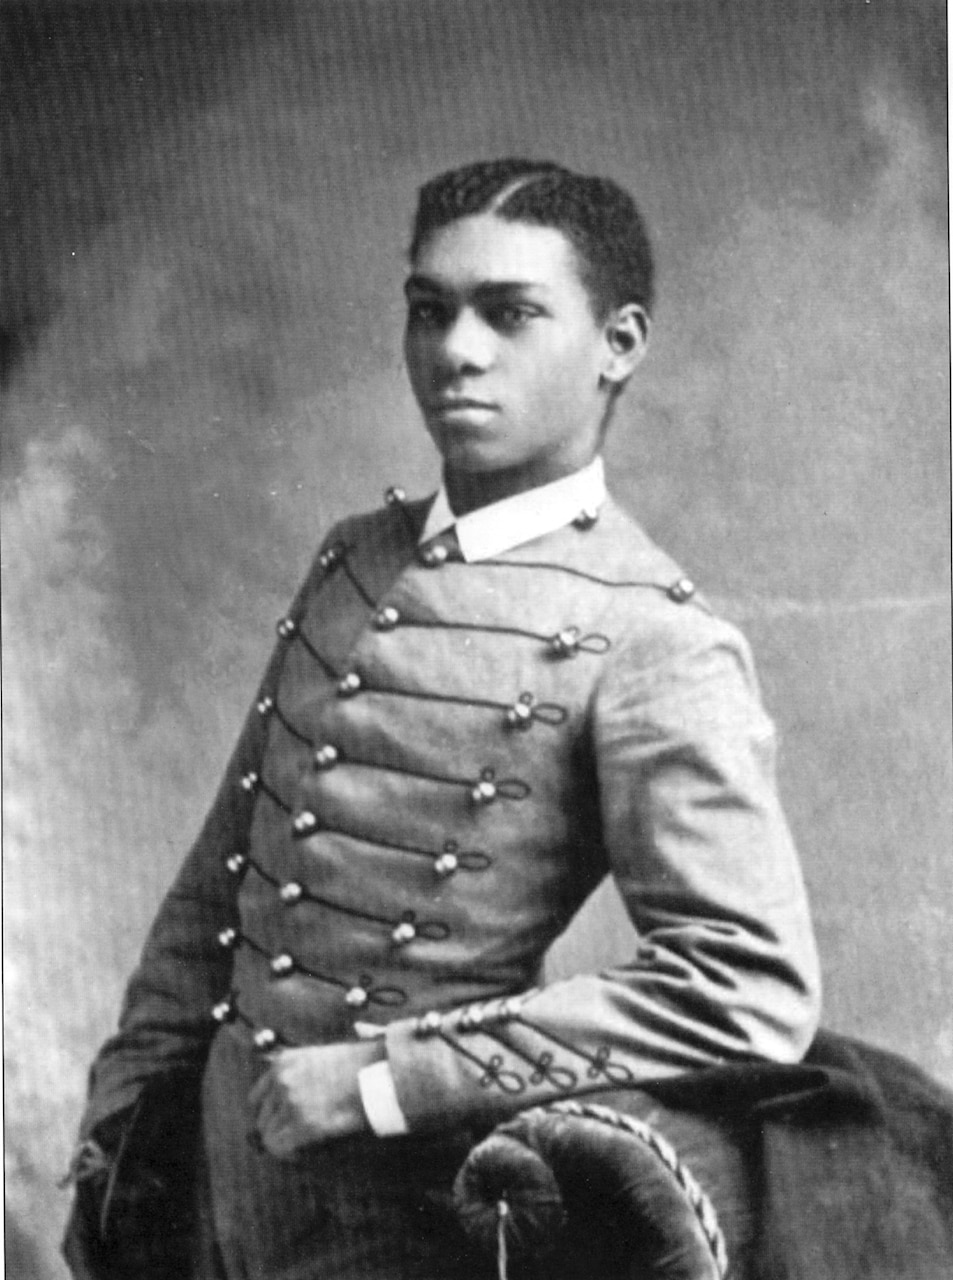 A historic photo shows a young man standing with his arm on the back of a chair.